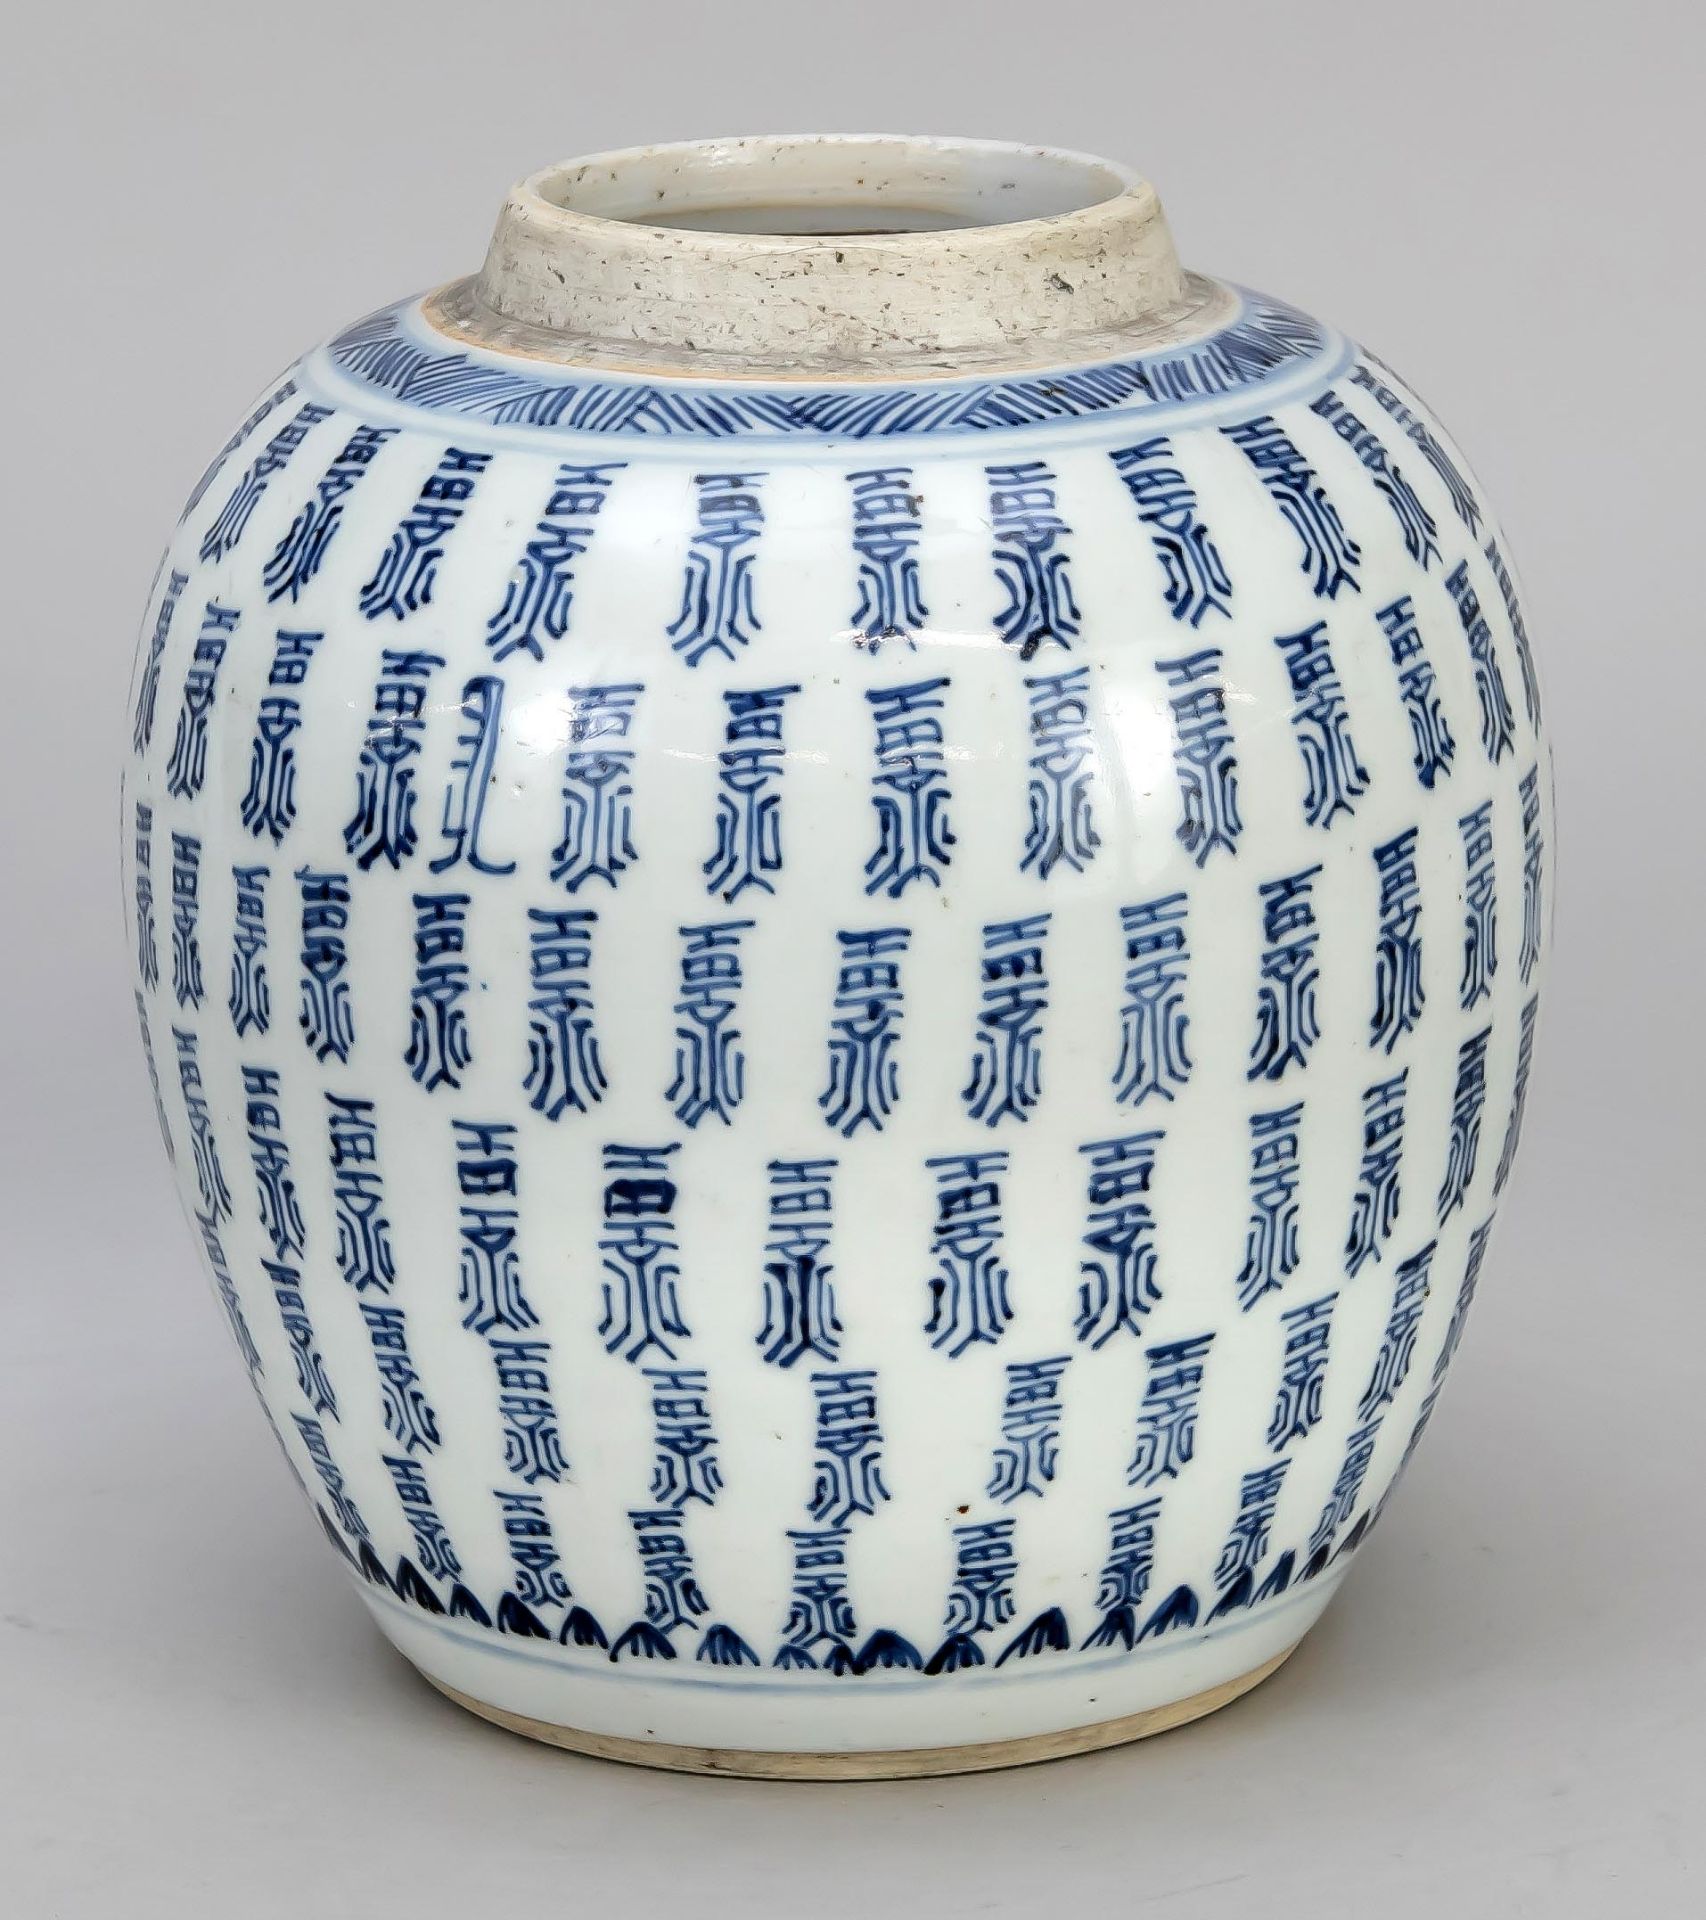 Ginger pot, China, 19th century, decorated all around with 6 register characters in cobalt blue,